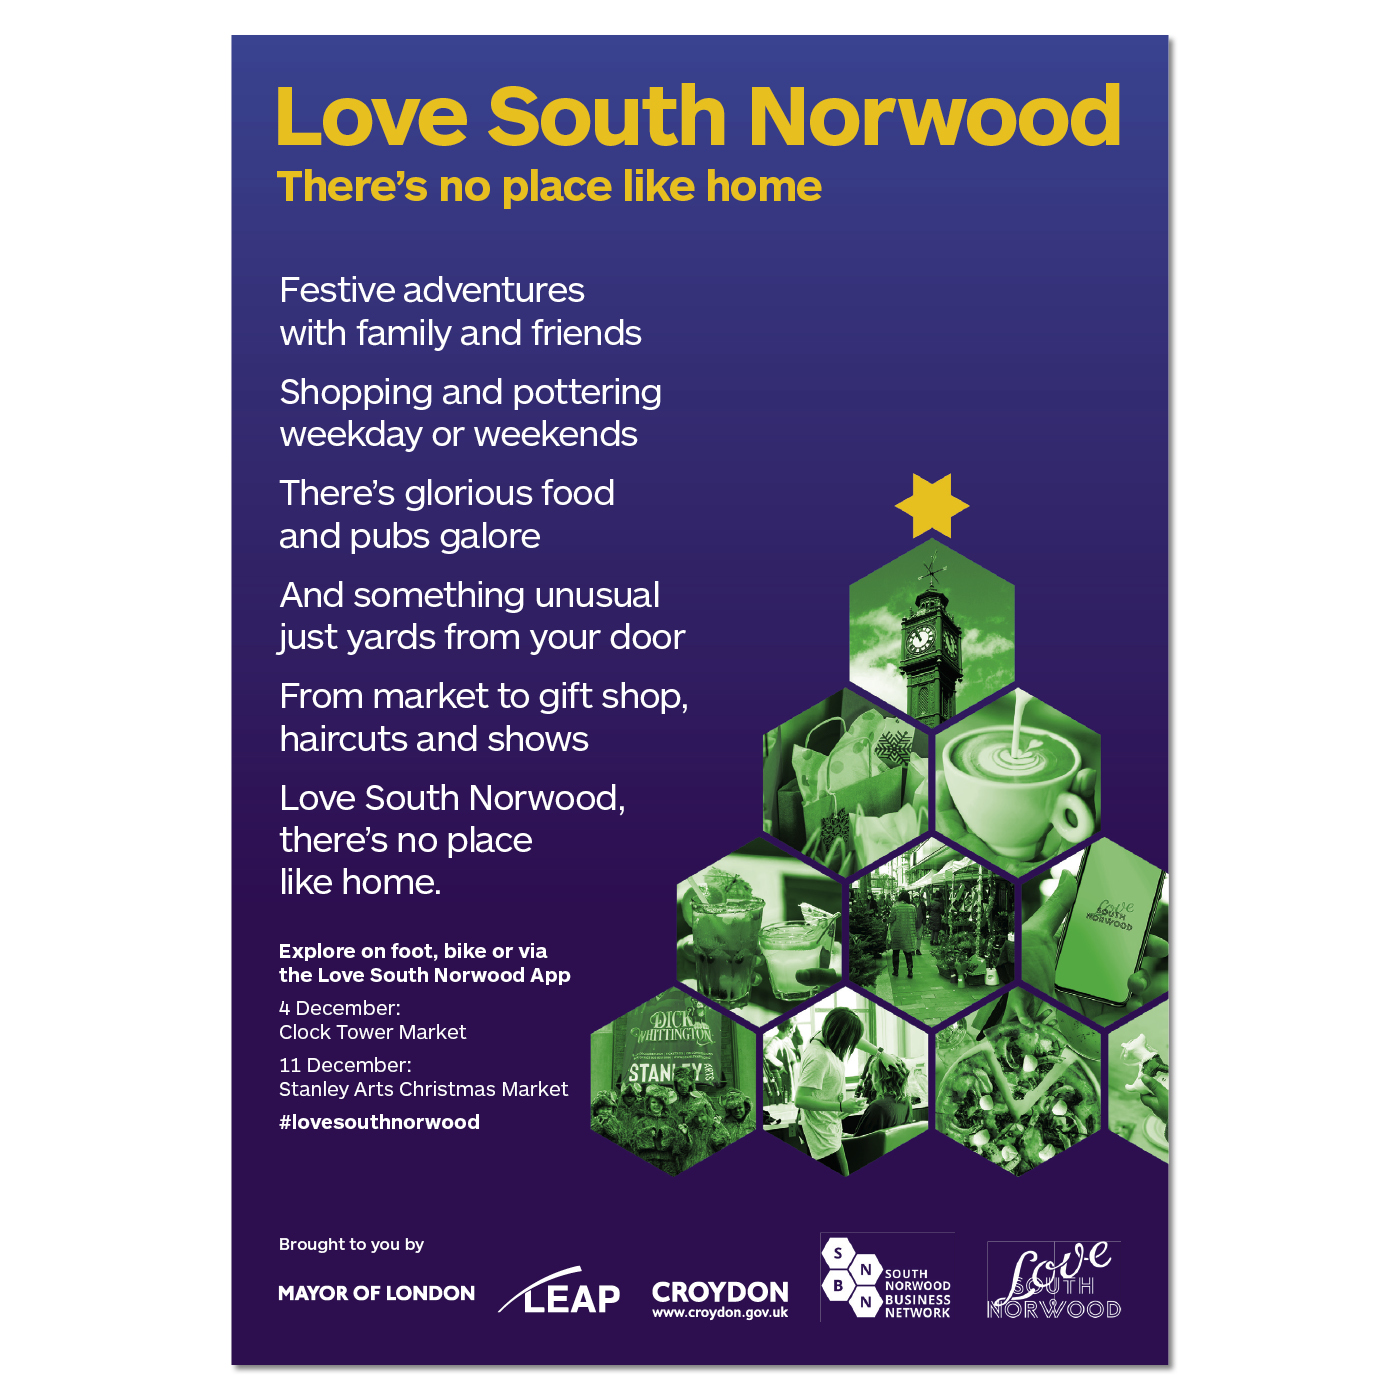 South Norwood Business Network